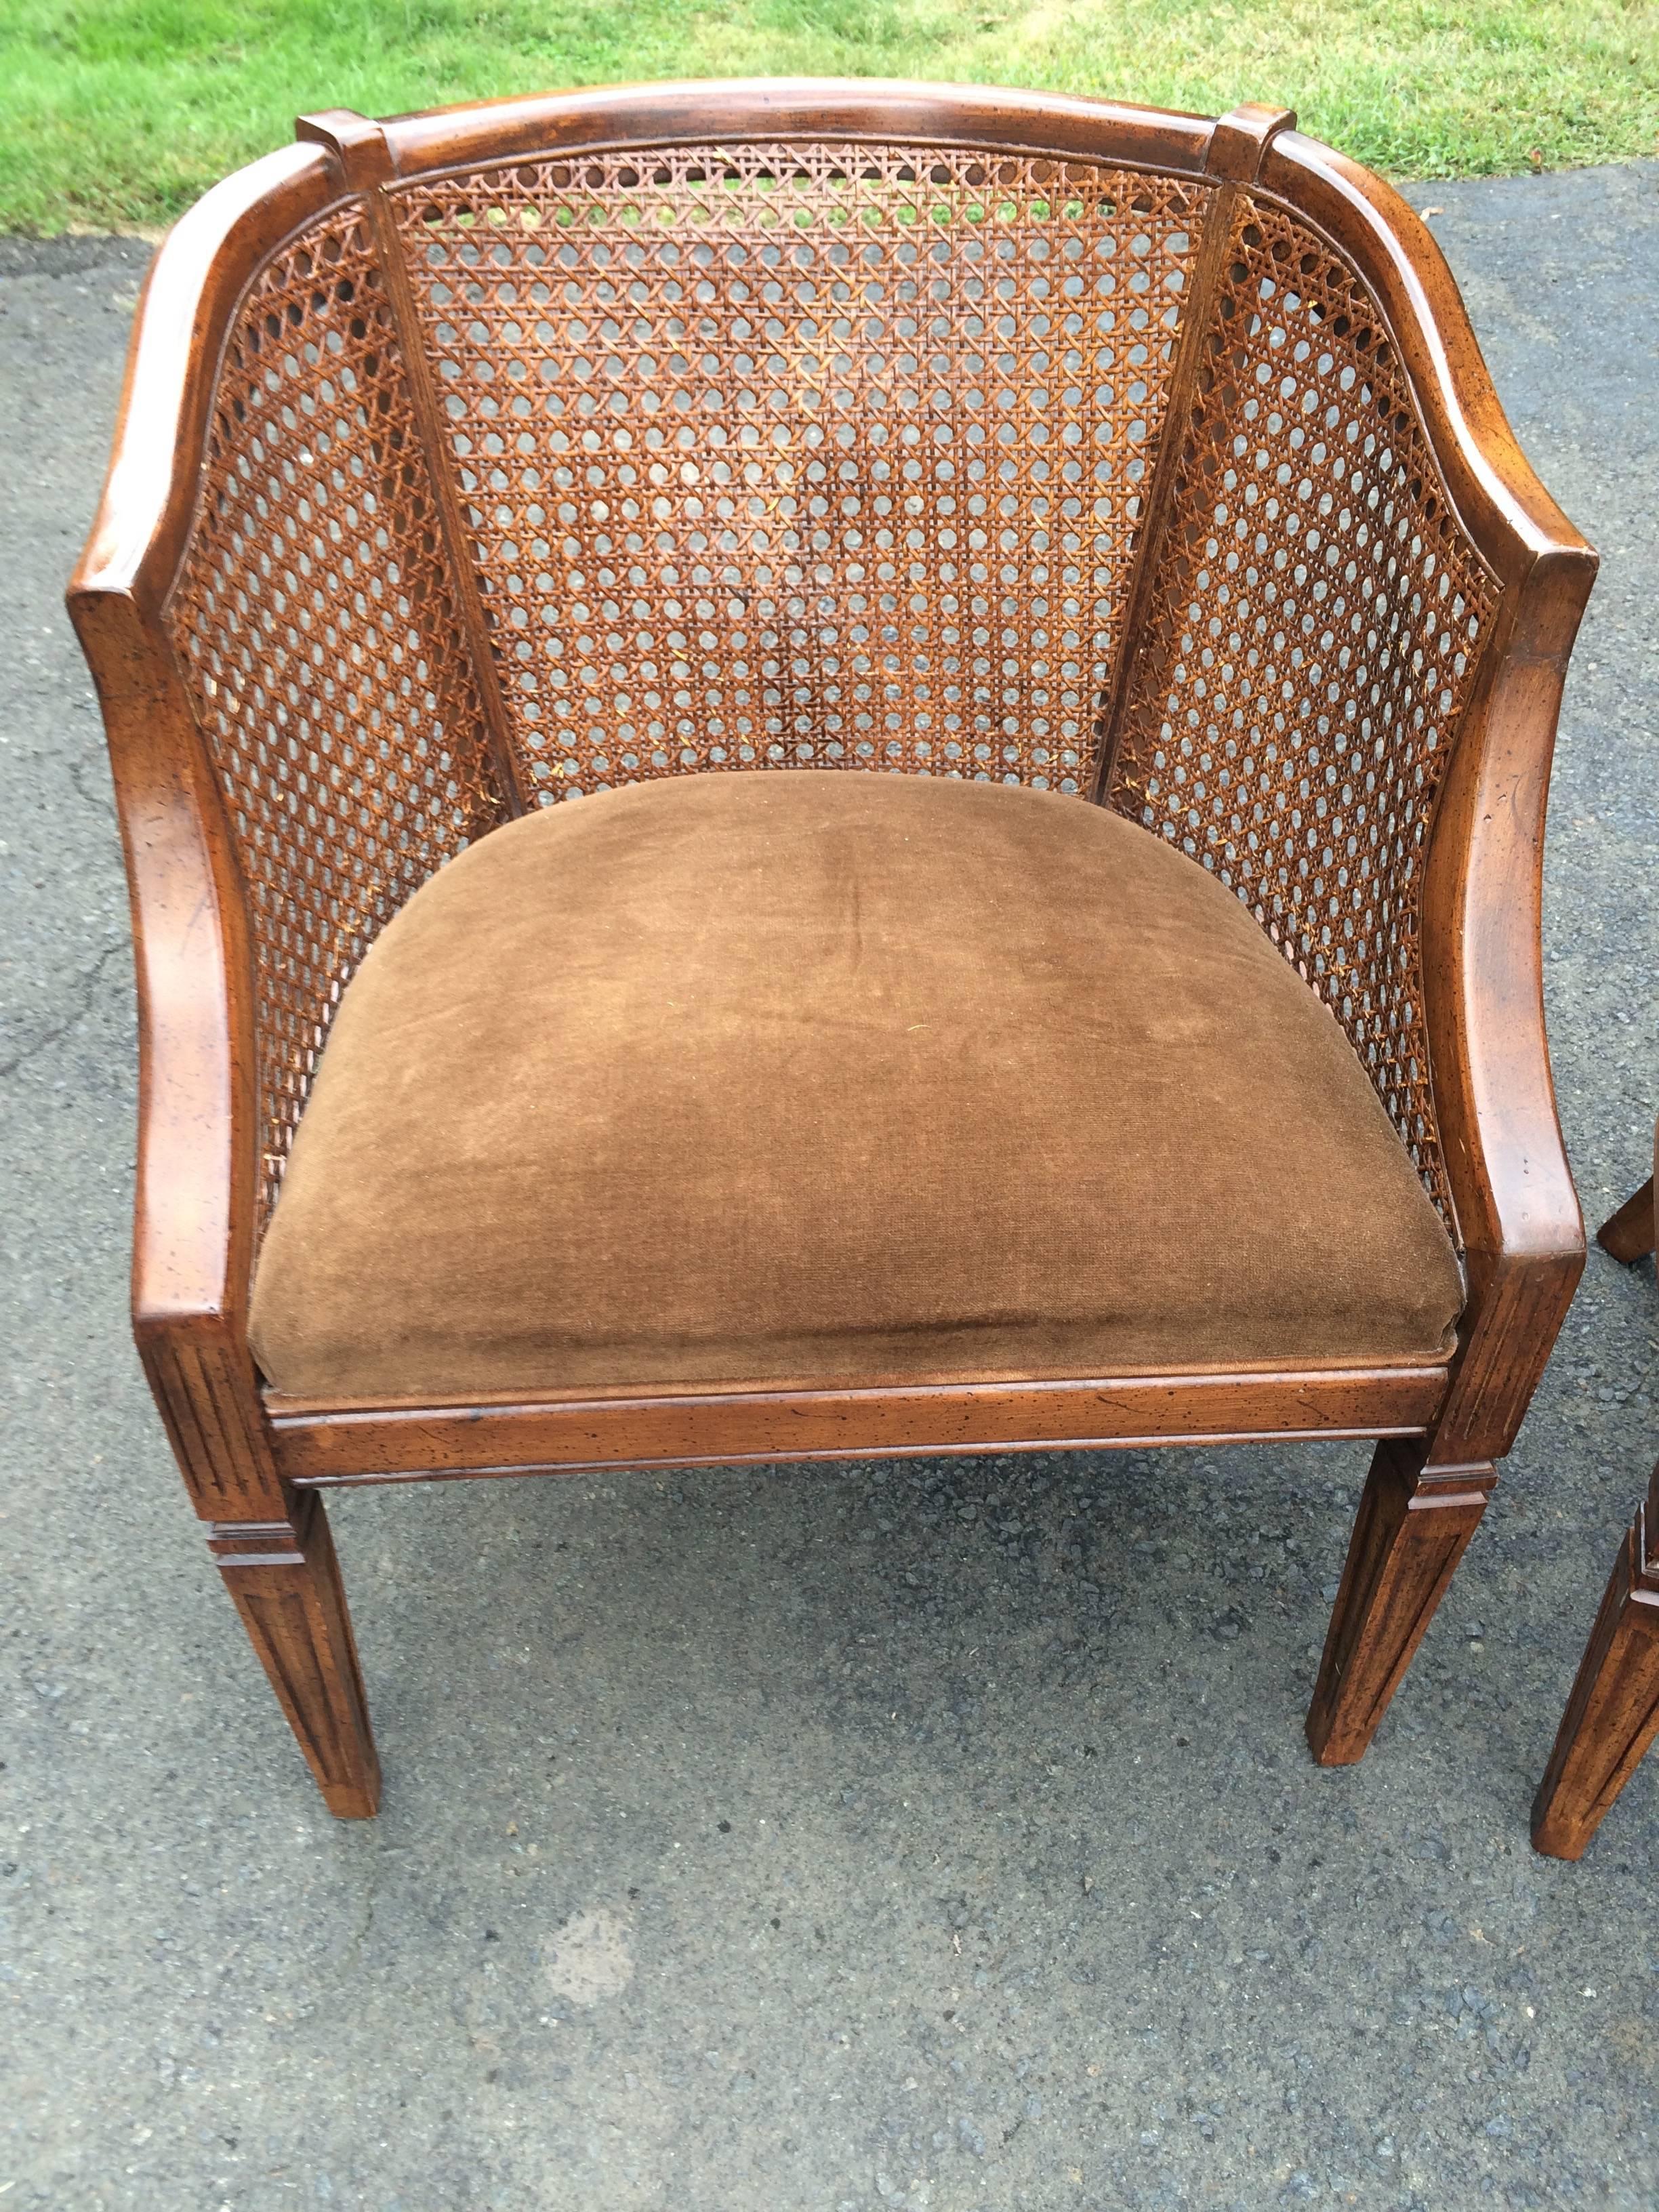 Handsome pair of chairs for the livingroom or library having rich carved wood and caned curved frames and luxurious brown velvet upholstered seats.